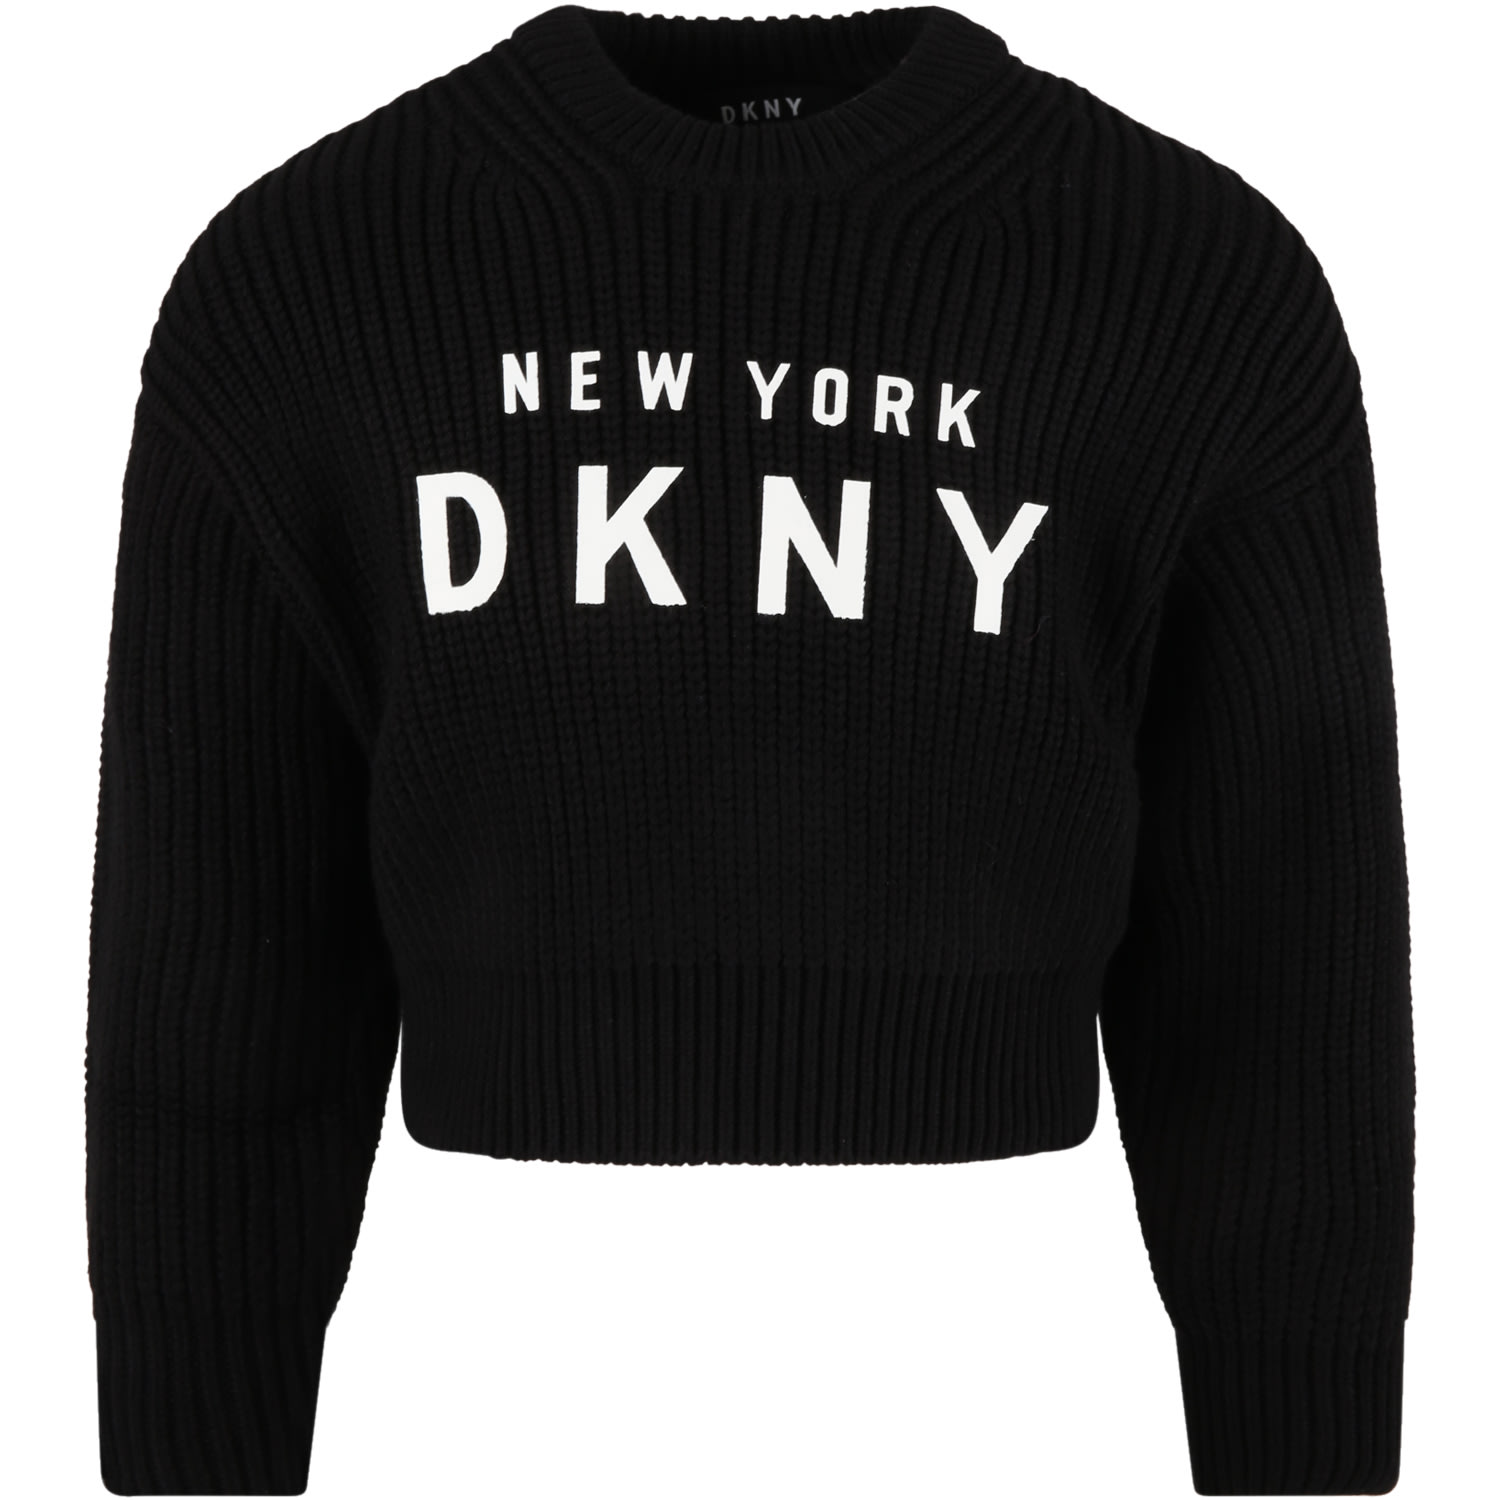 DKNY Black Sweater For Kids With White Logo